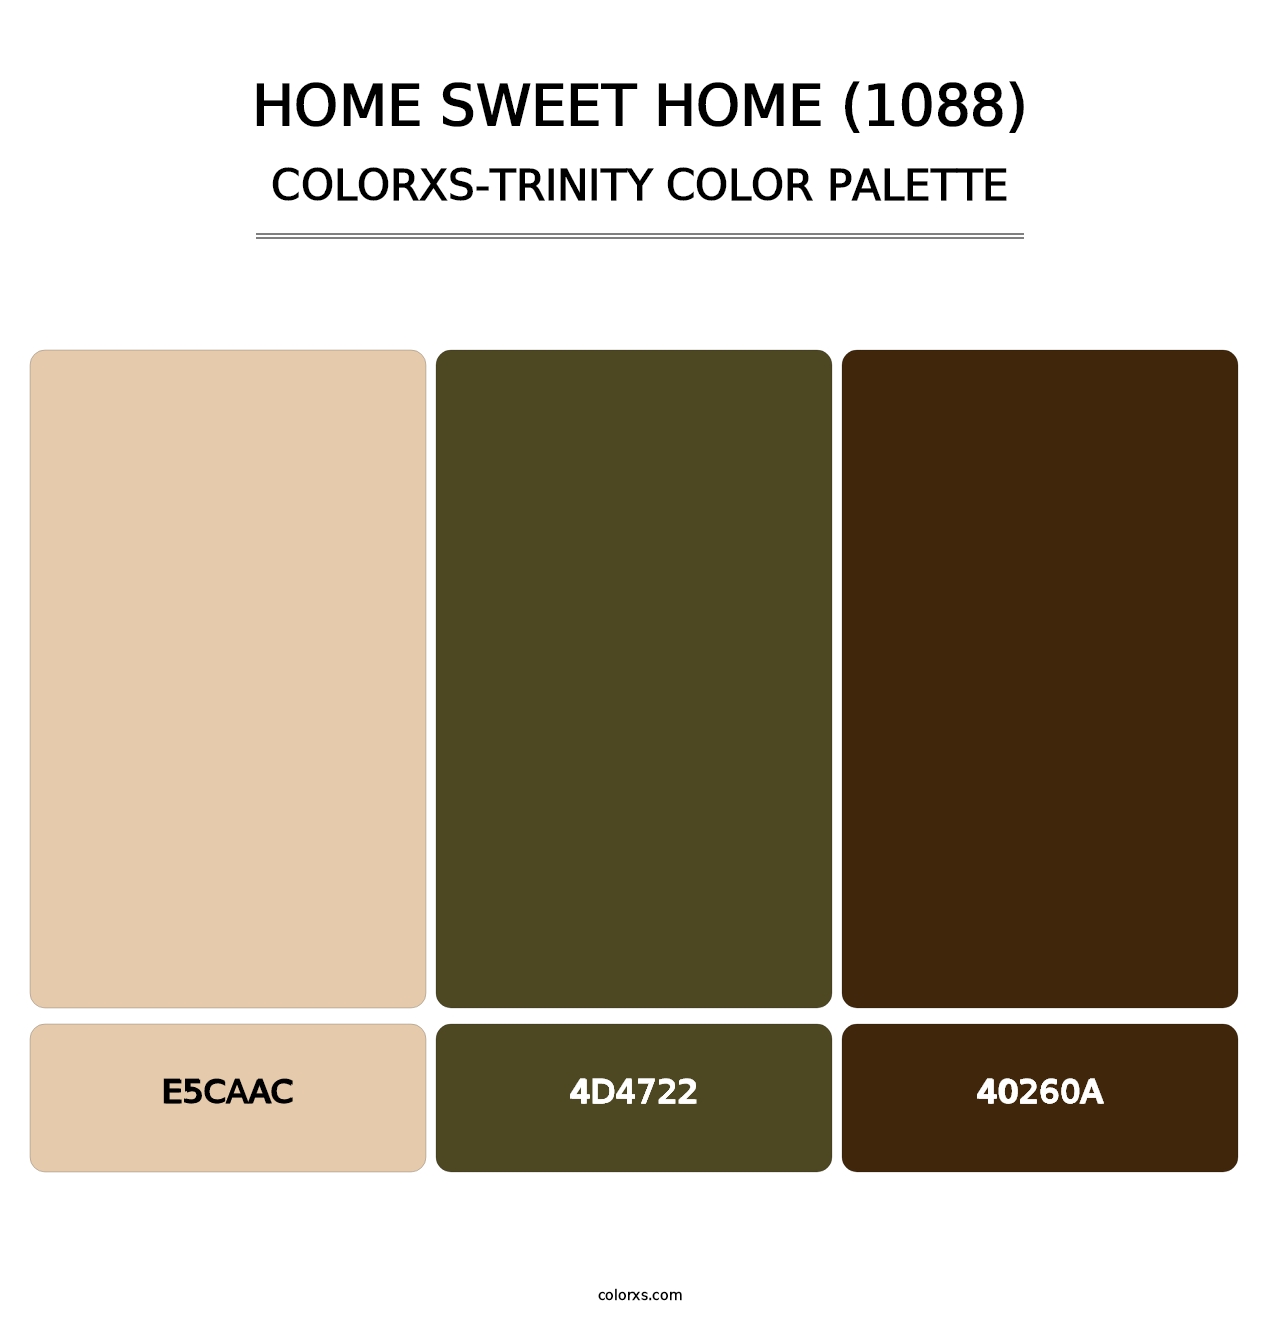 Home Sweet Home (1088) - Colorxs Trinity Palette